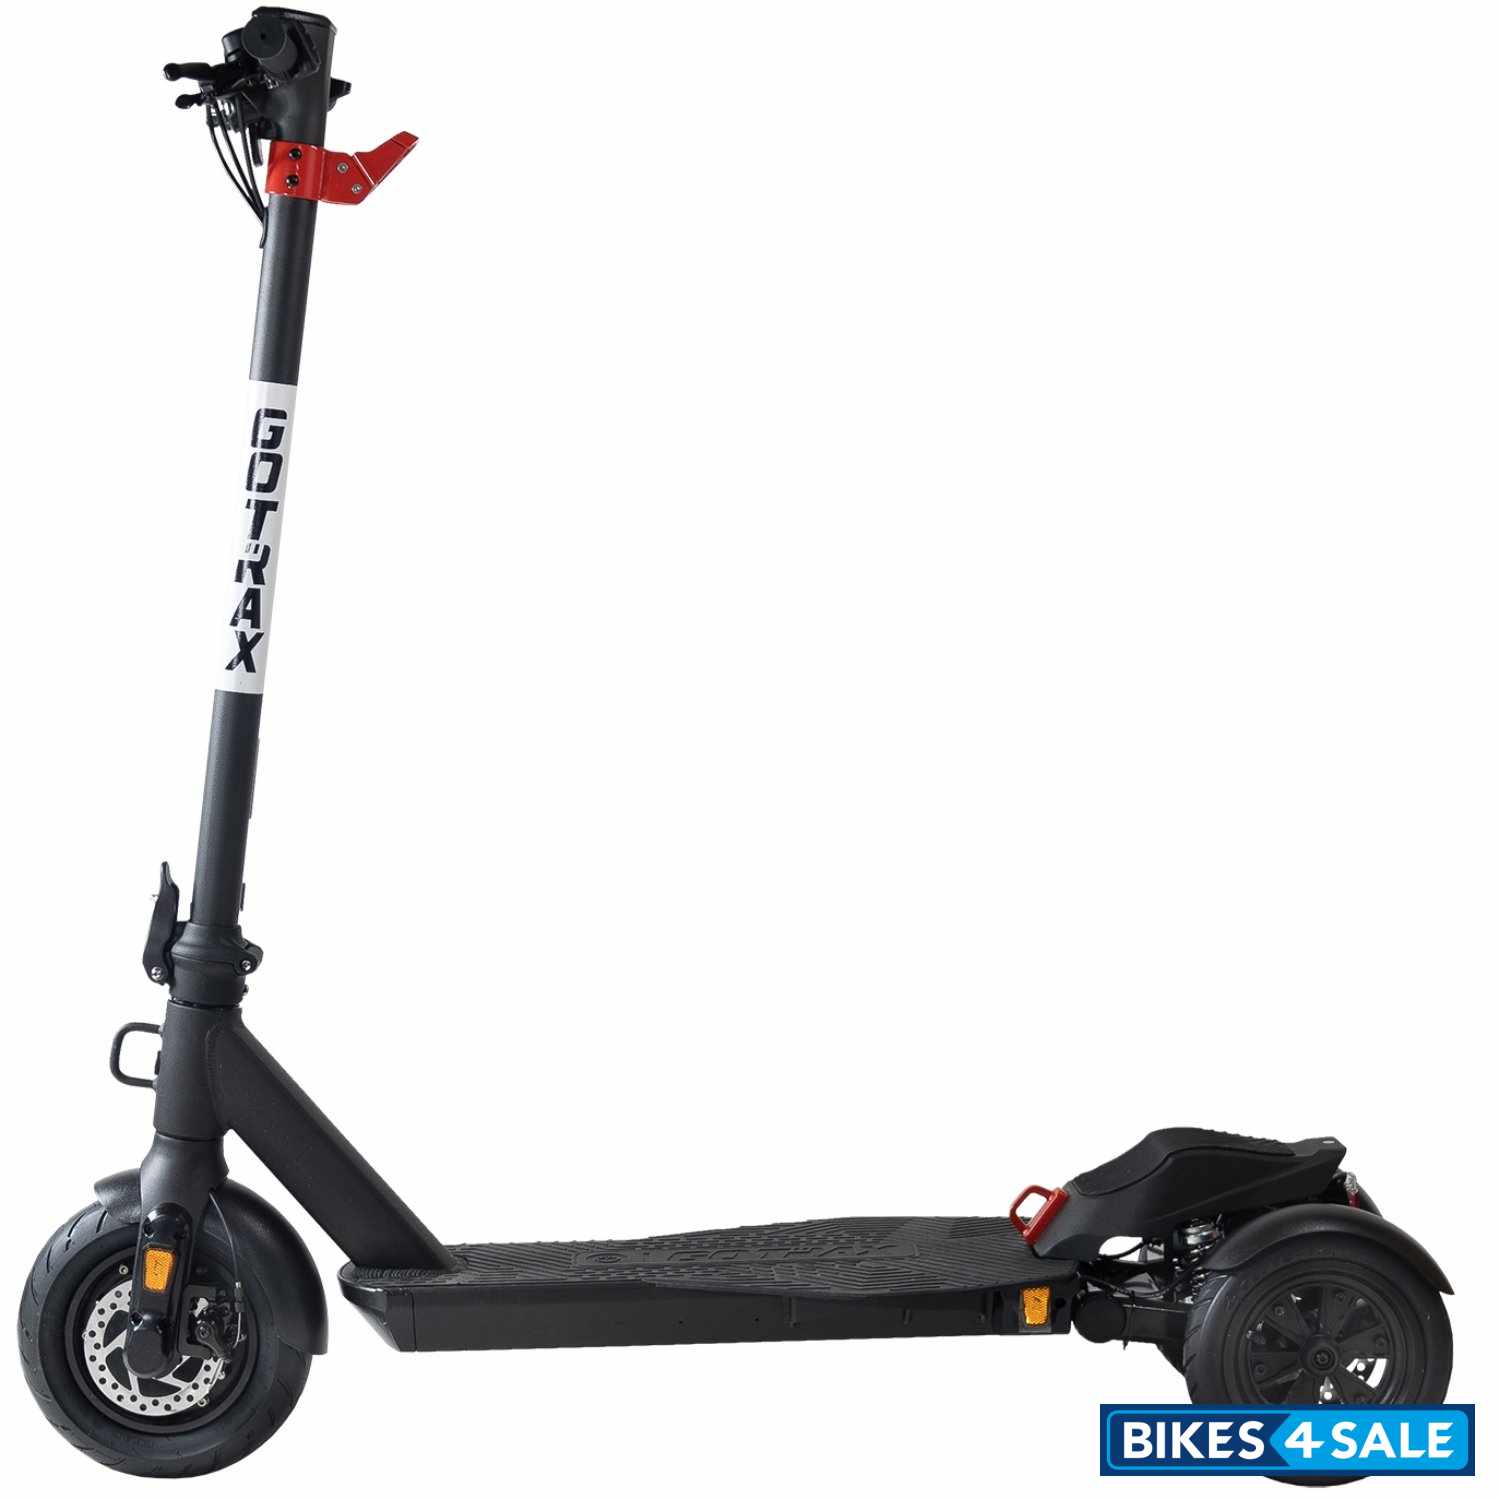 GOTRAX G Pro 3 Wheel Electric Scooter